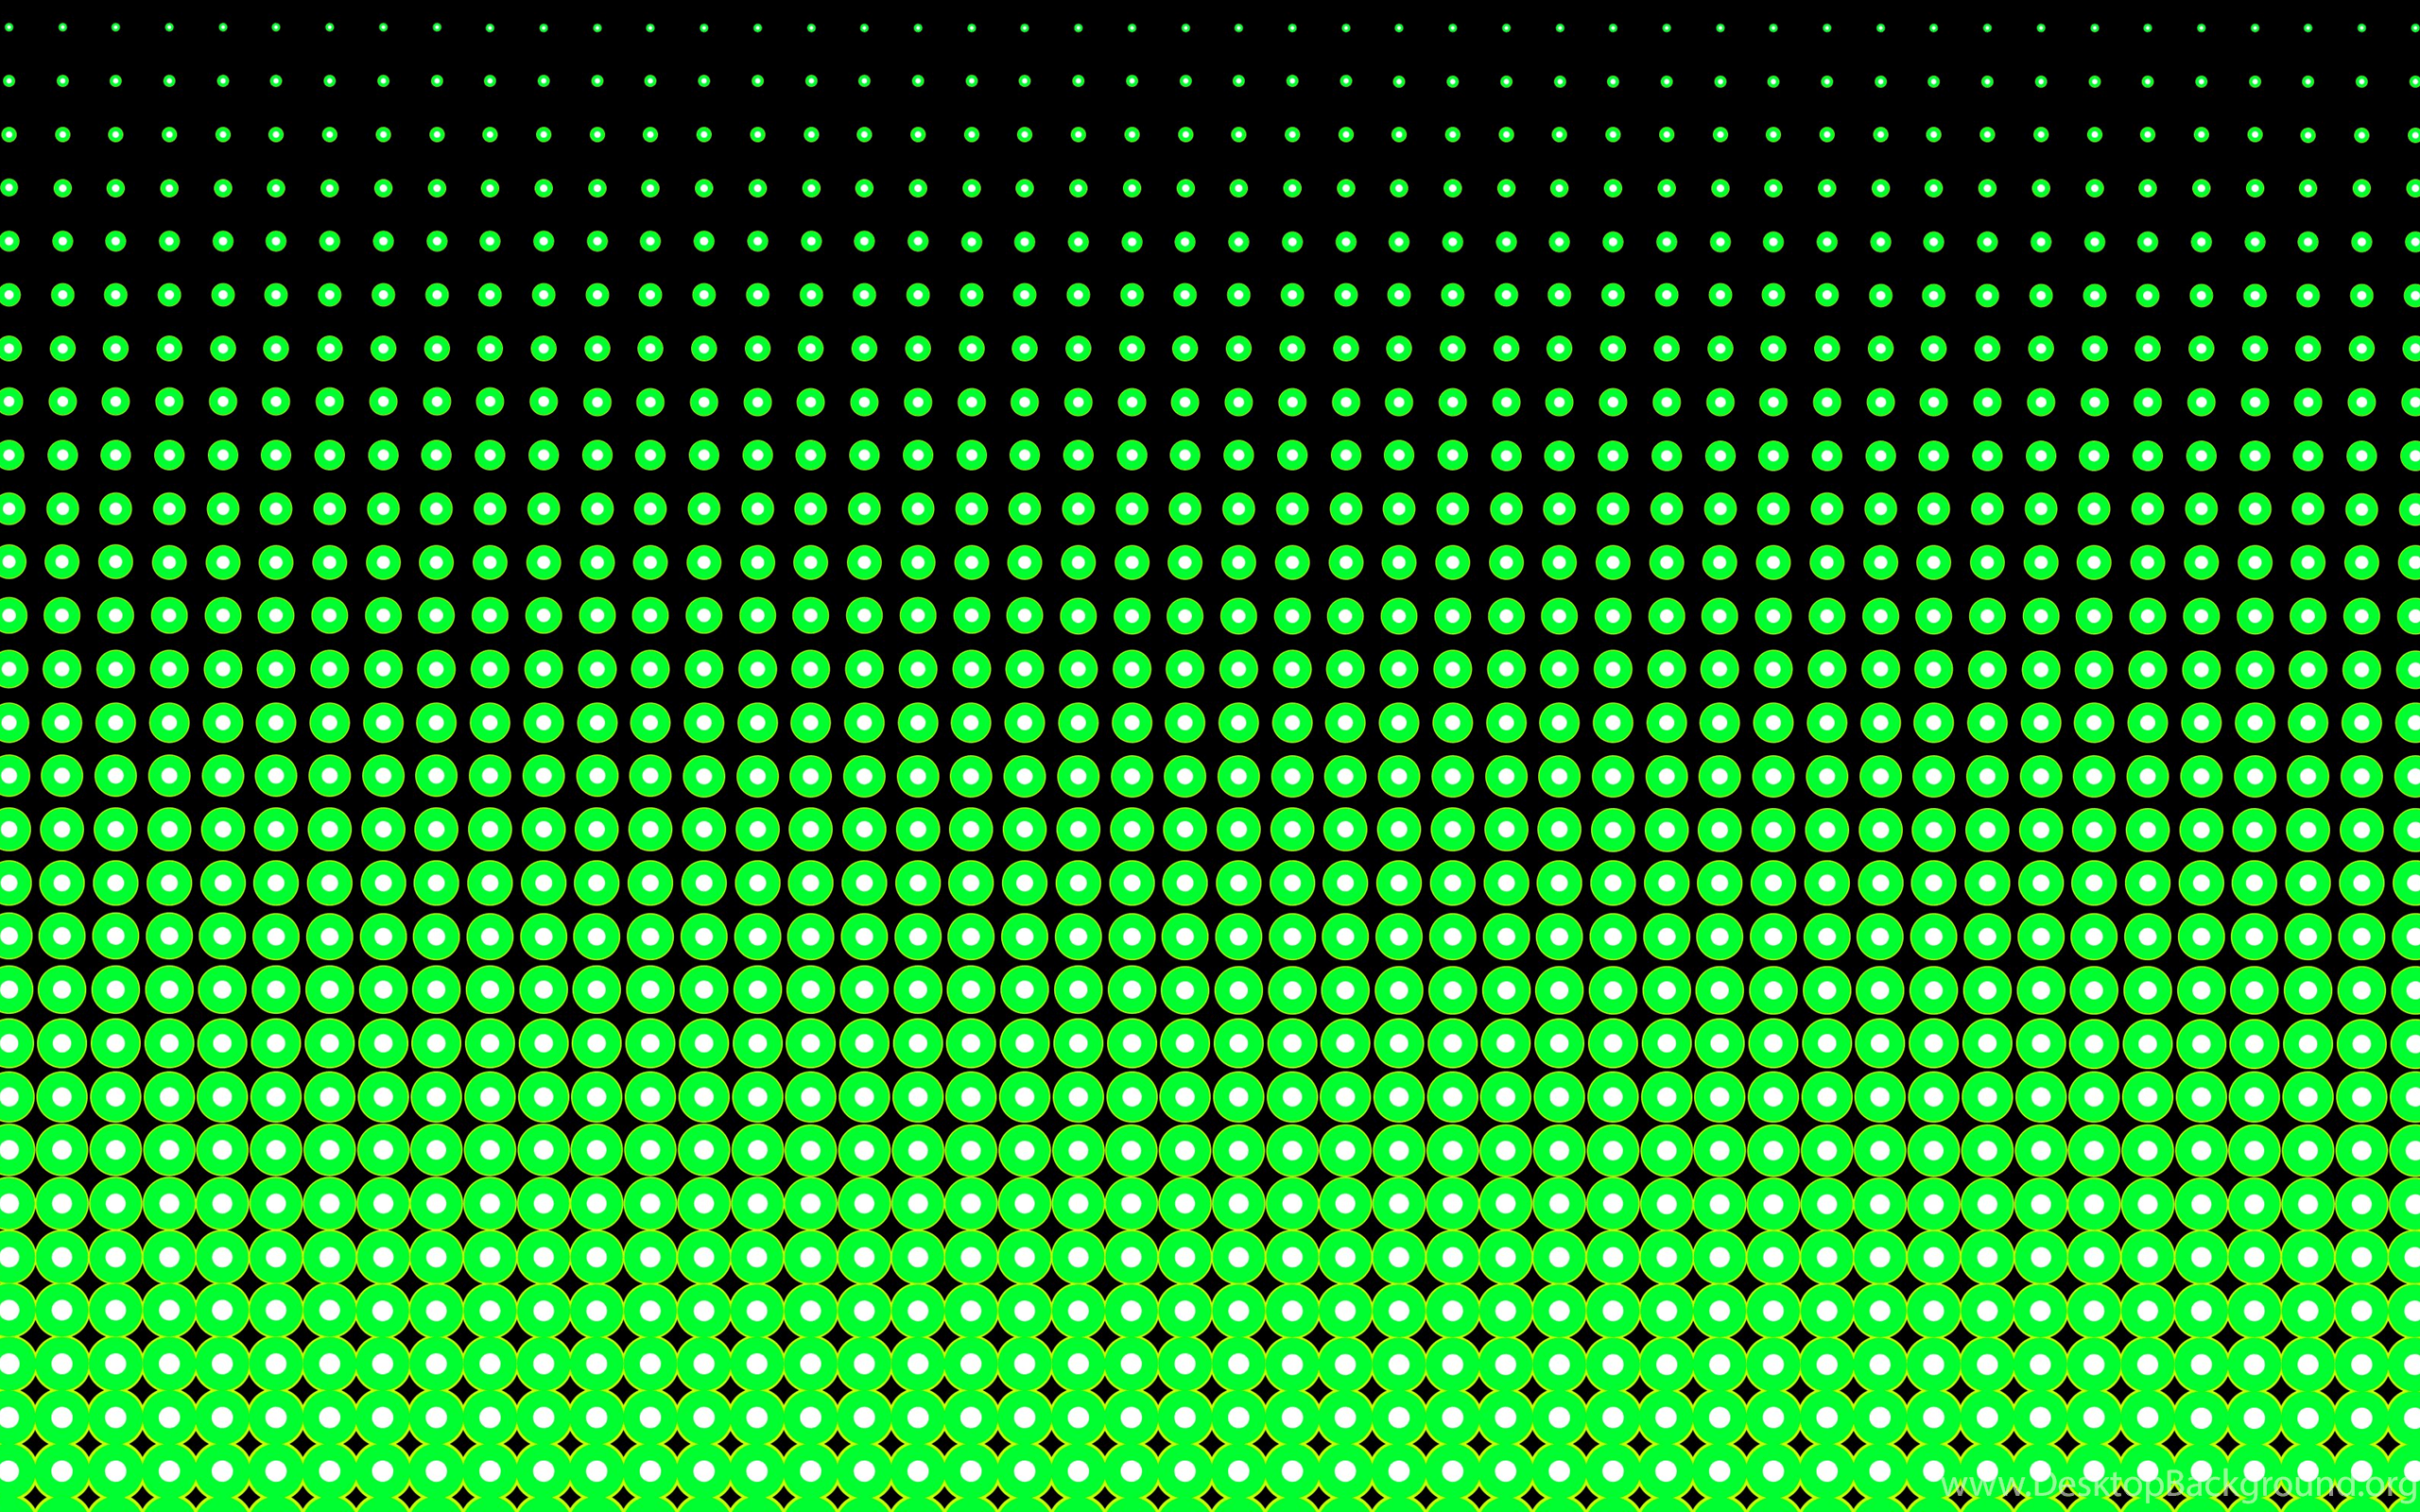 Black and Neon Green Wallpapers.